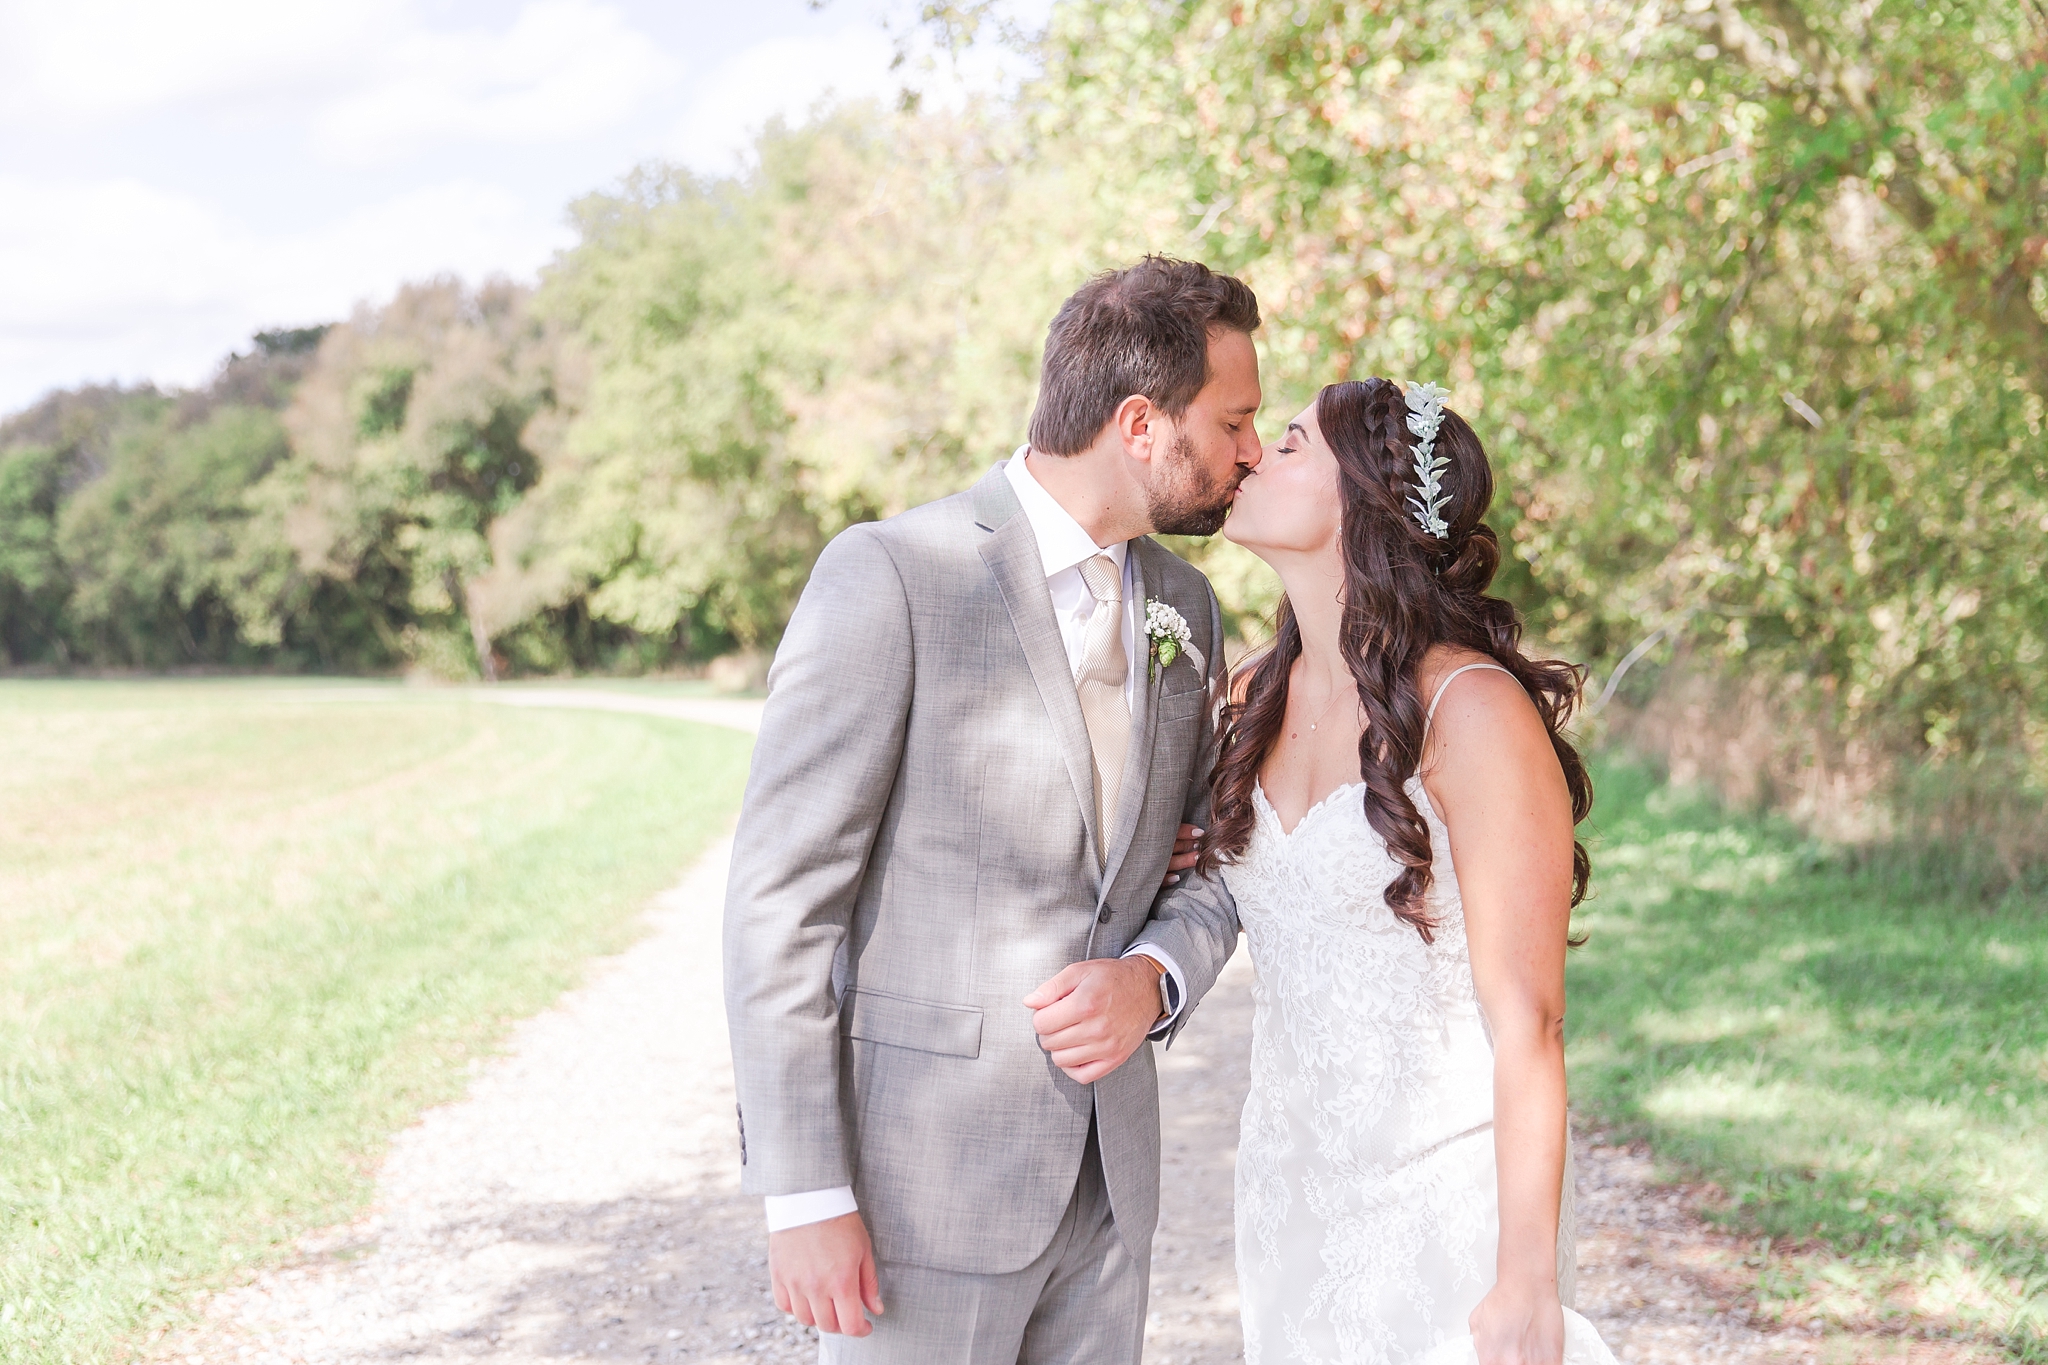 natural-rustic-wedding-photos-at-frutig-farms-the-valley-in-ann-arbor-michigan-by-courtney-carolyn-photography_0040.jpg